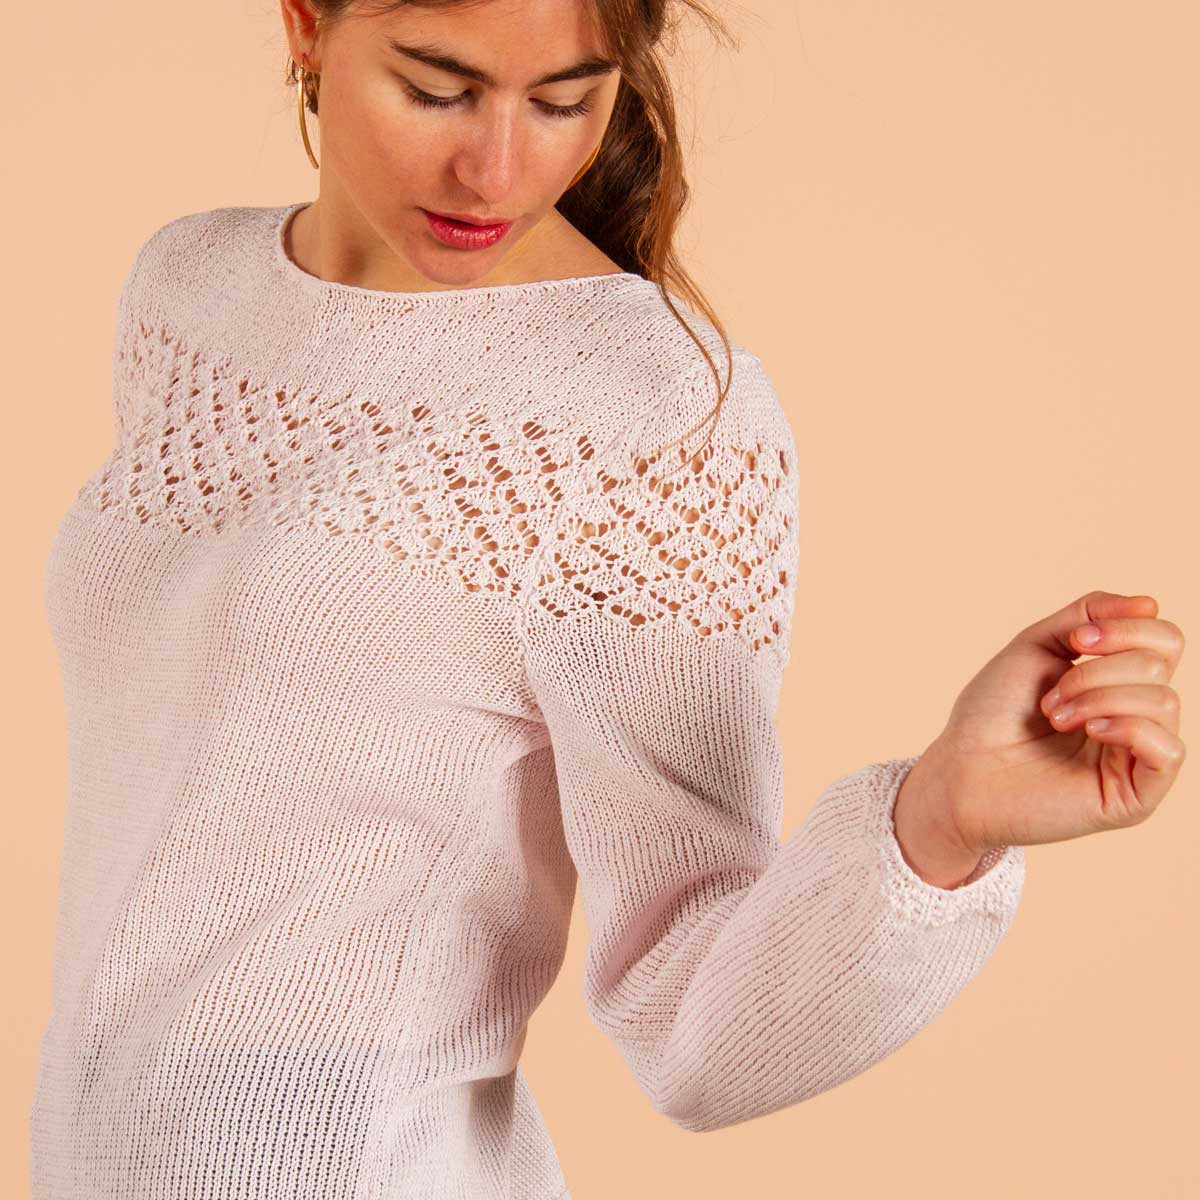 Cotton jumper to knit